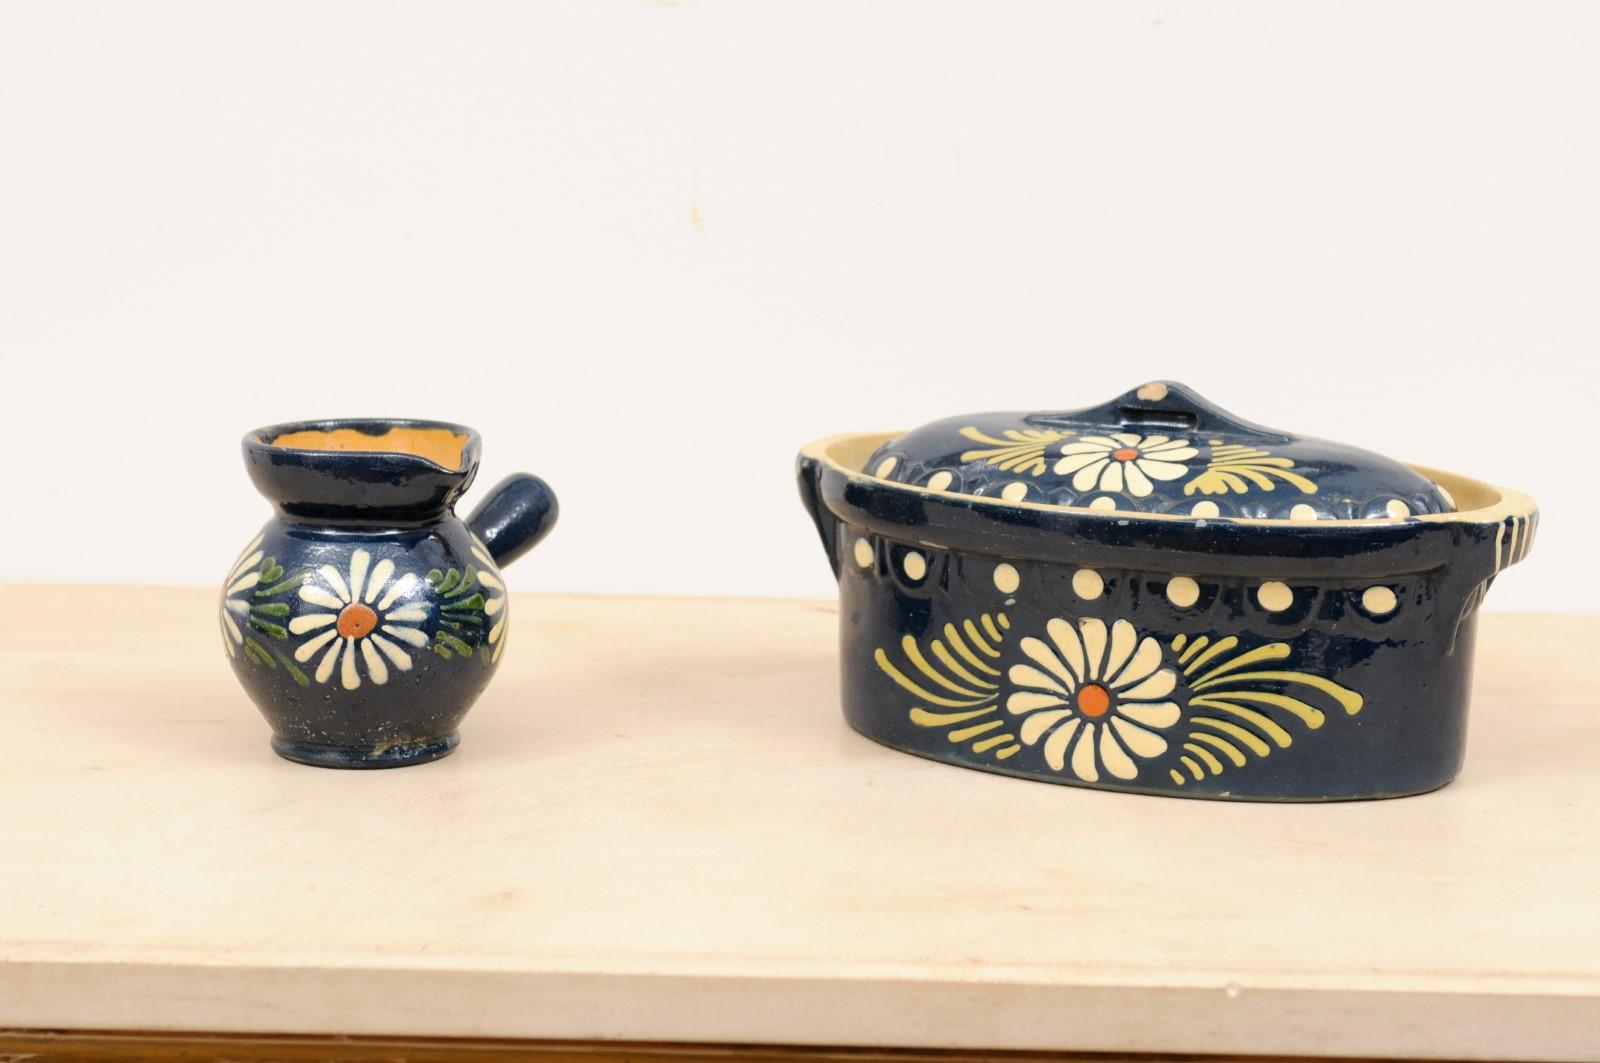 Two French pottery serving pieces from the 19th century, with blue glaze and white flowers. They are priced and sold separately, $525 for the casserole dish and $325 for the pot. Created in France during the 19th century, this pottery set features